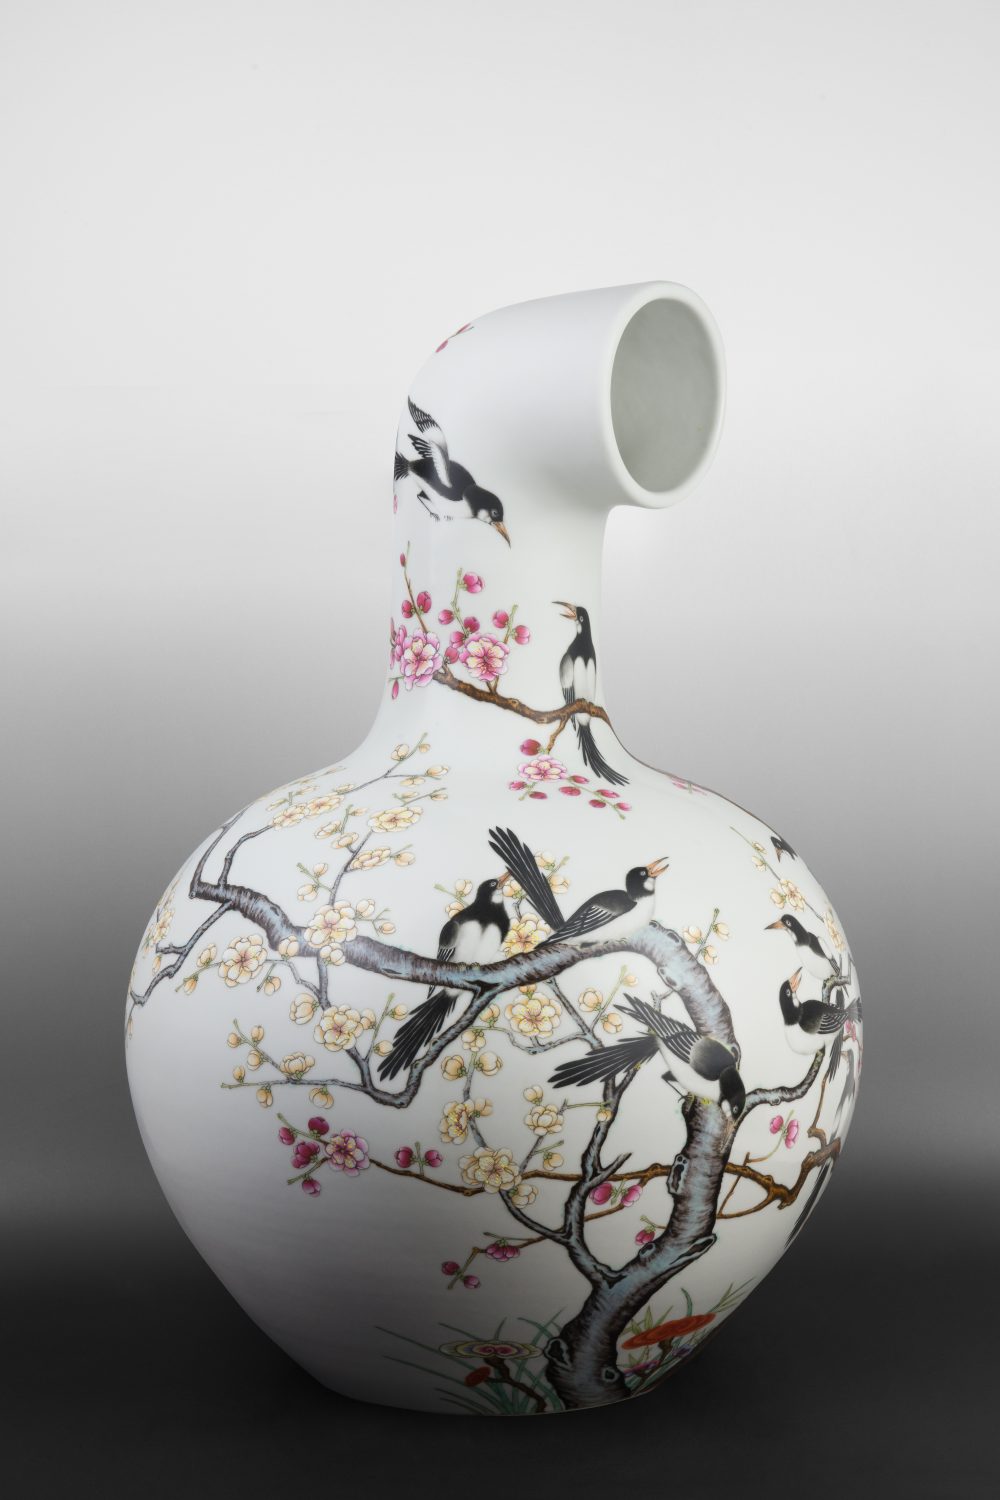 MadeIn Curved Vase - Vault-of-Heaven Vase with Magpie Pattern, Qianlong Period, Qing Dynasty